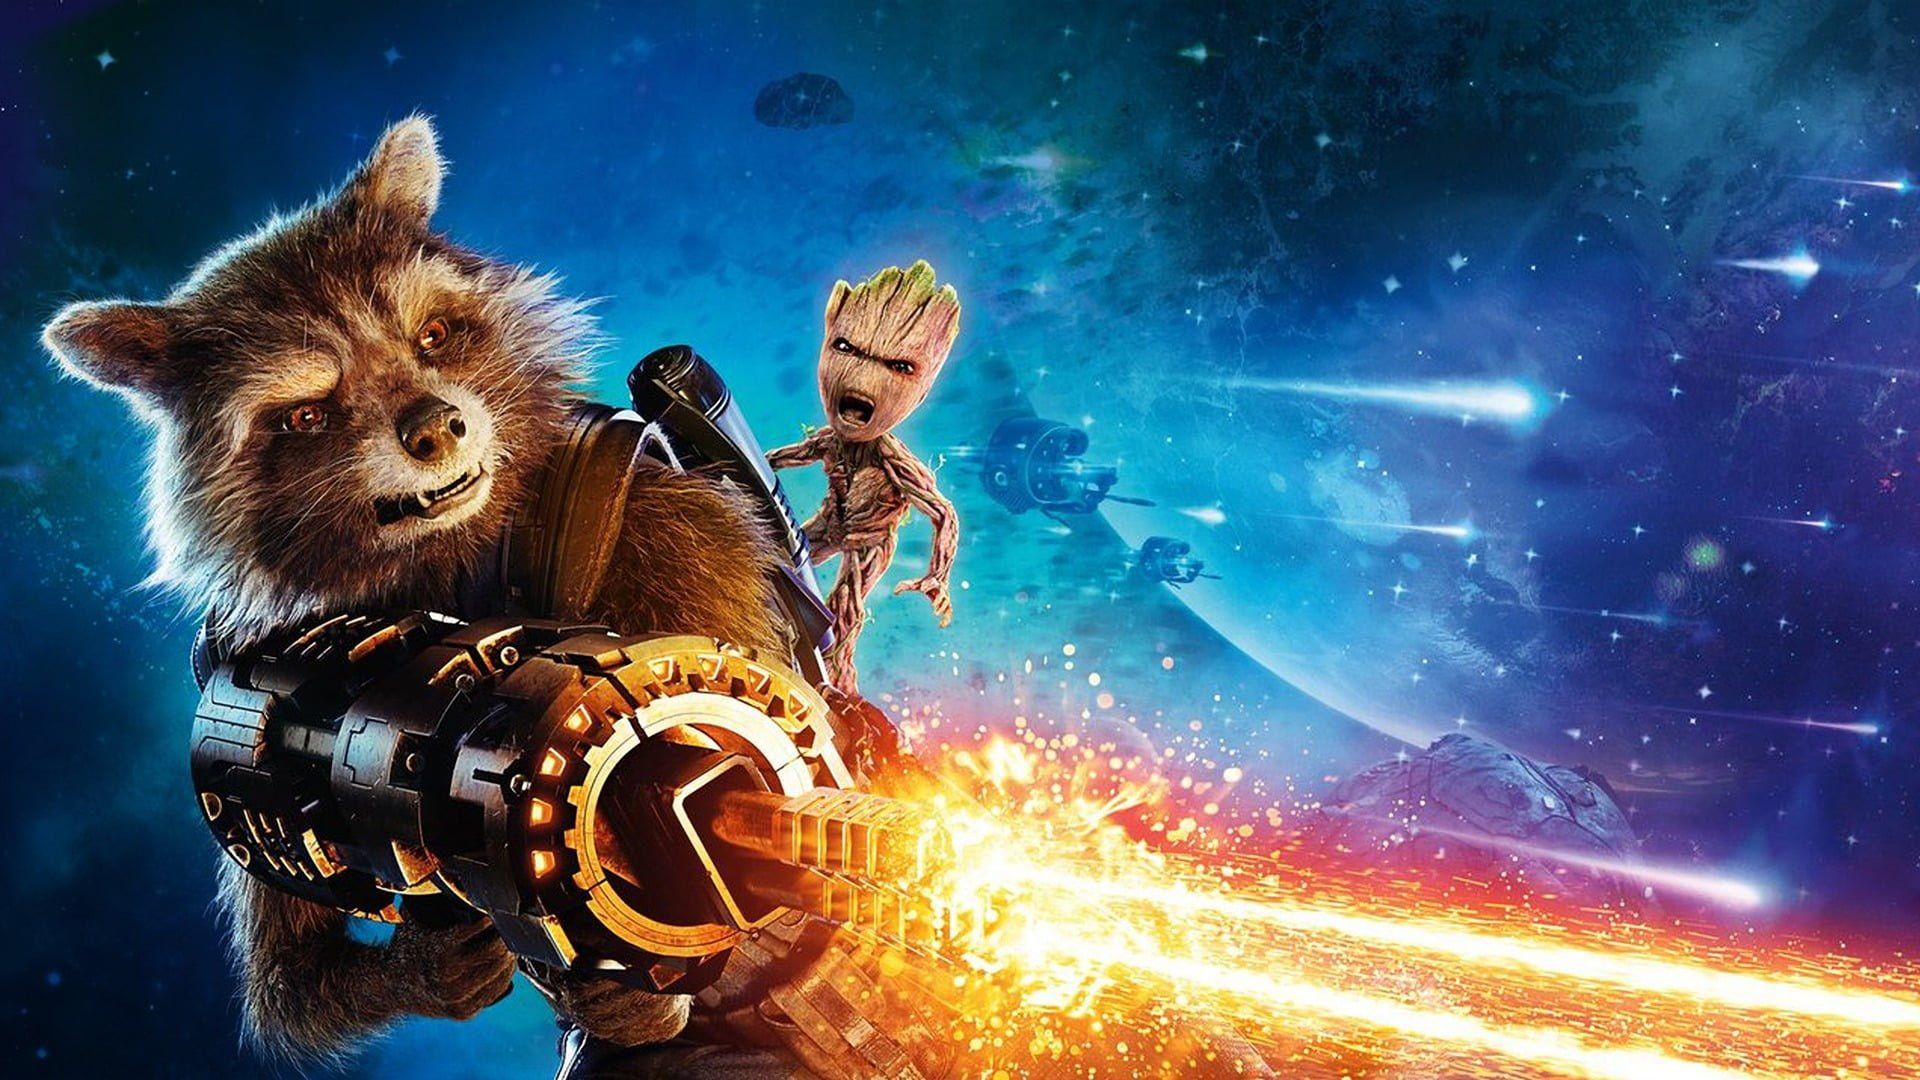 Guardians of The Galaxy Rocket and Groot digital wallpaper, Guardians of the Galaxy Vol. 2 • Wallpaper For You HD Wallpaper For Desktop & Mobile